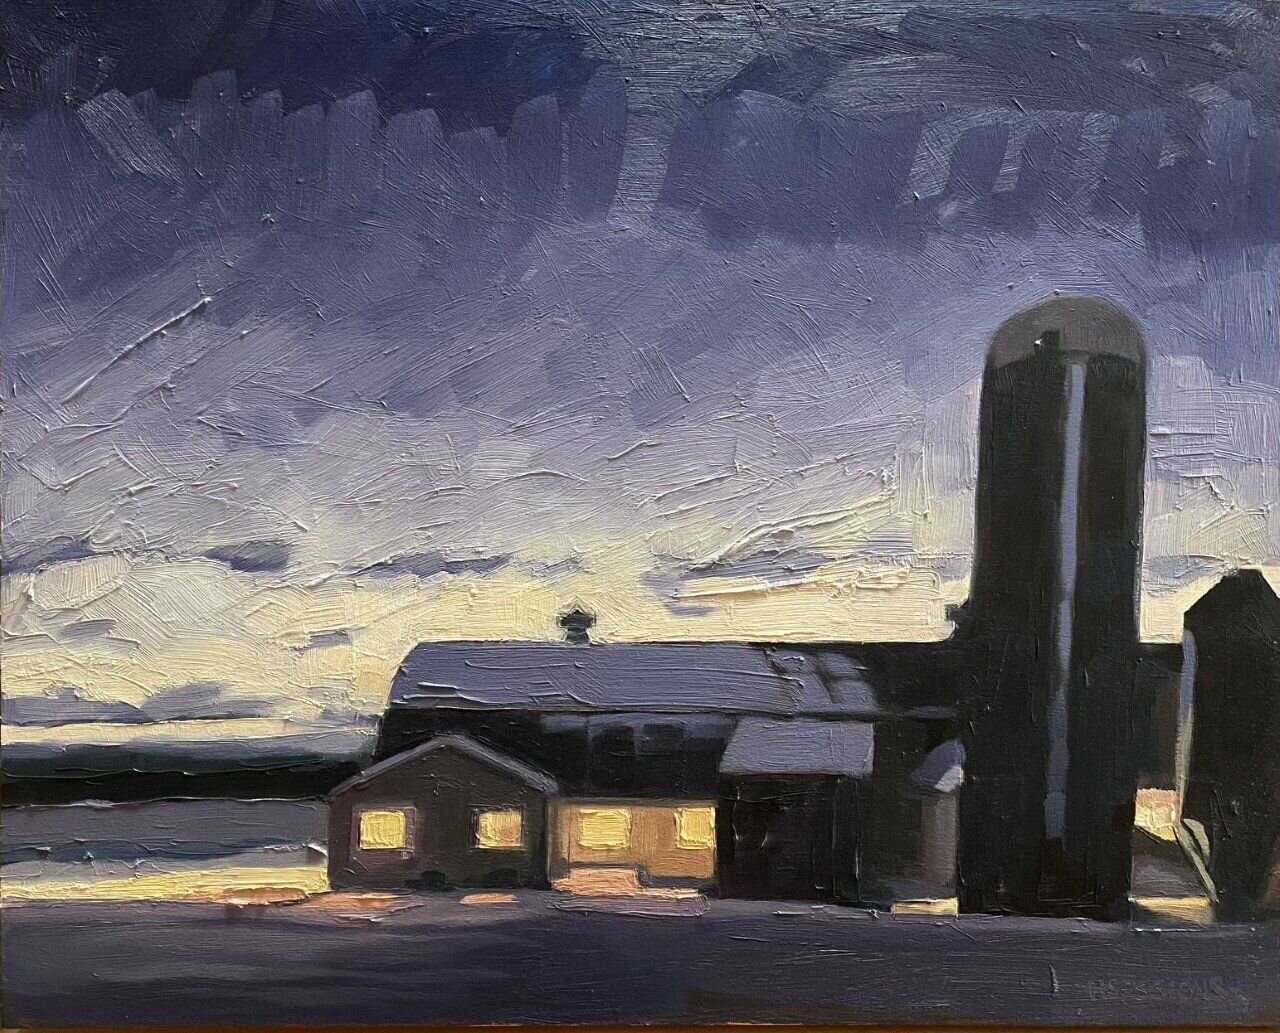 Scapeland Farm Busy at Night
oil on panel, 16x20, $1,165 
Hannah Sessions